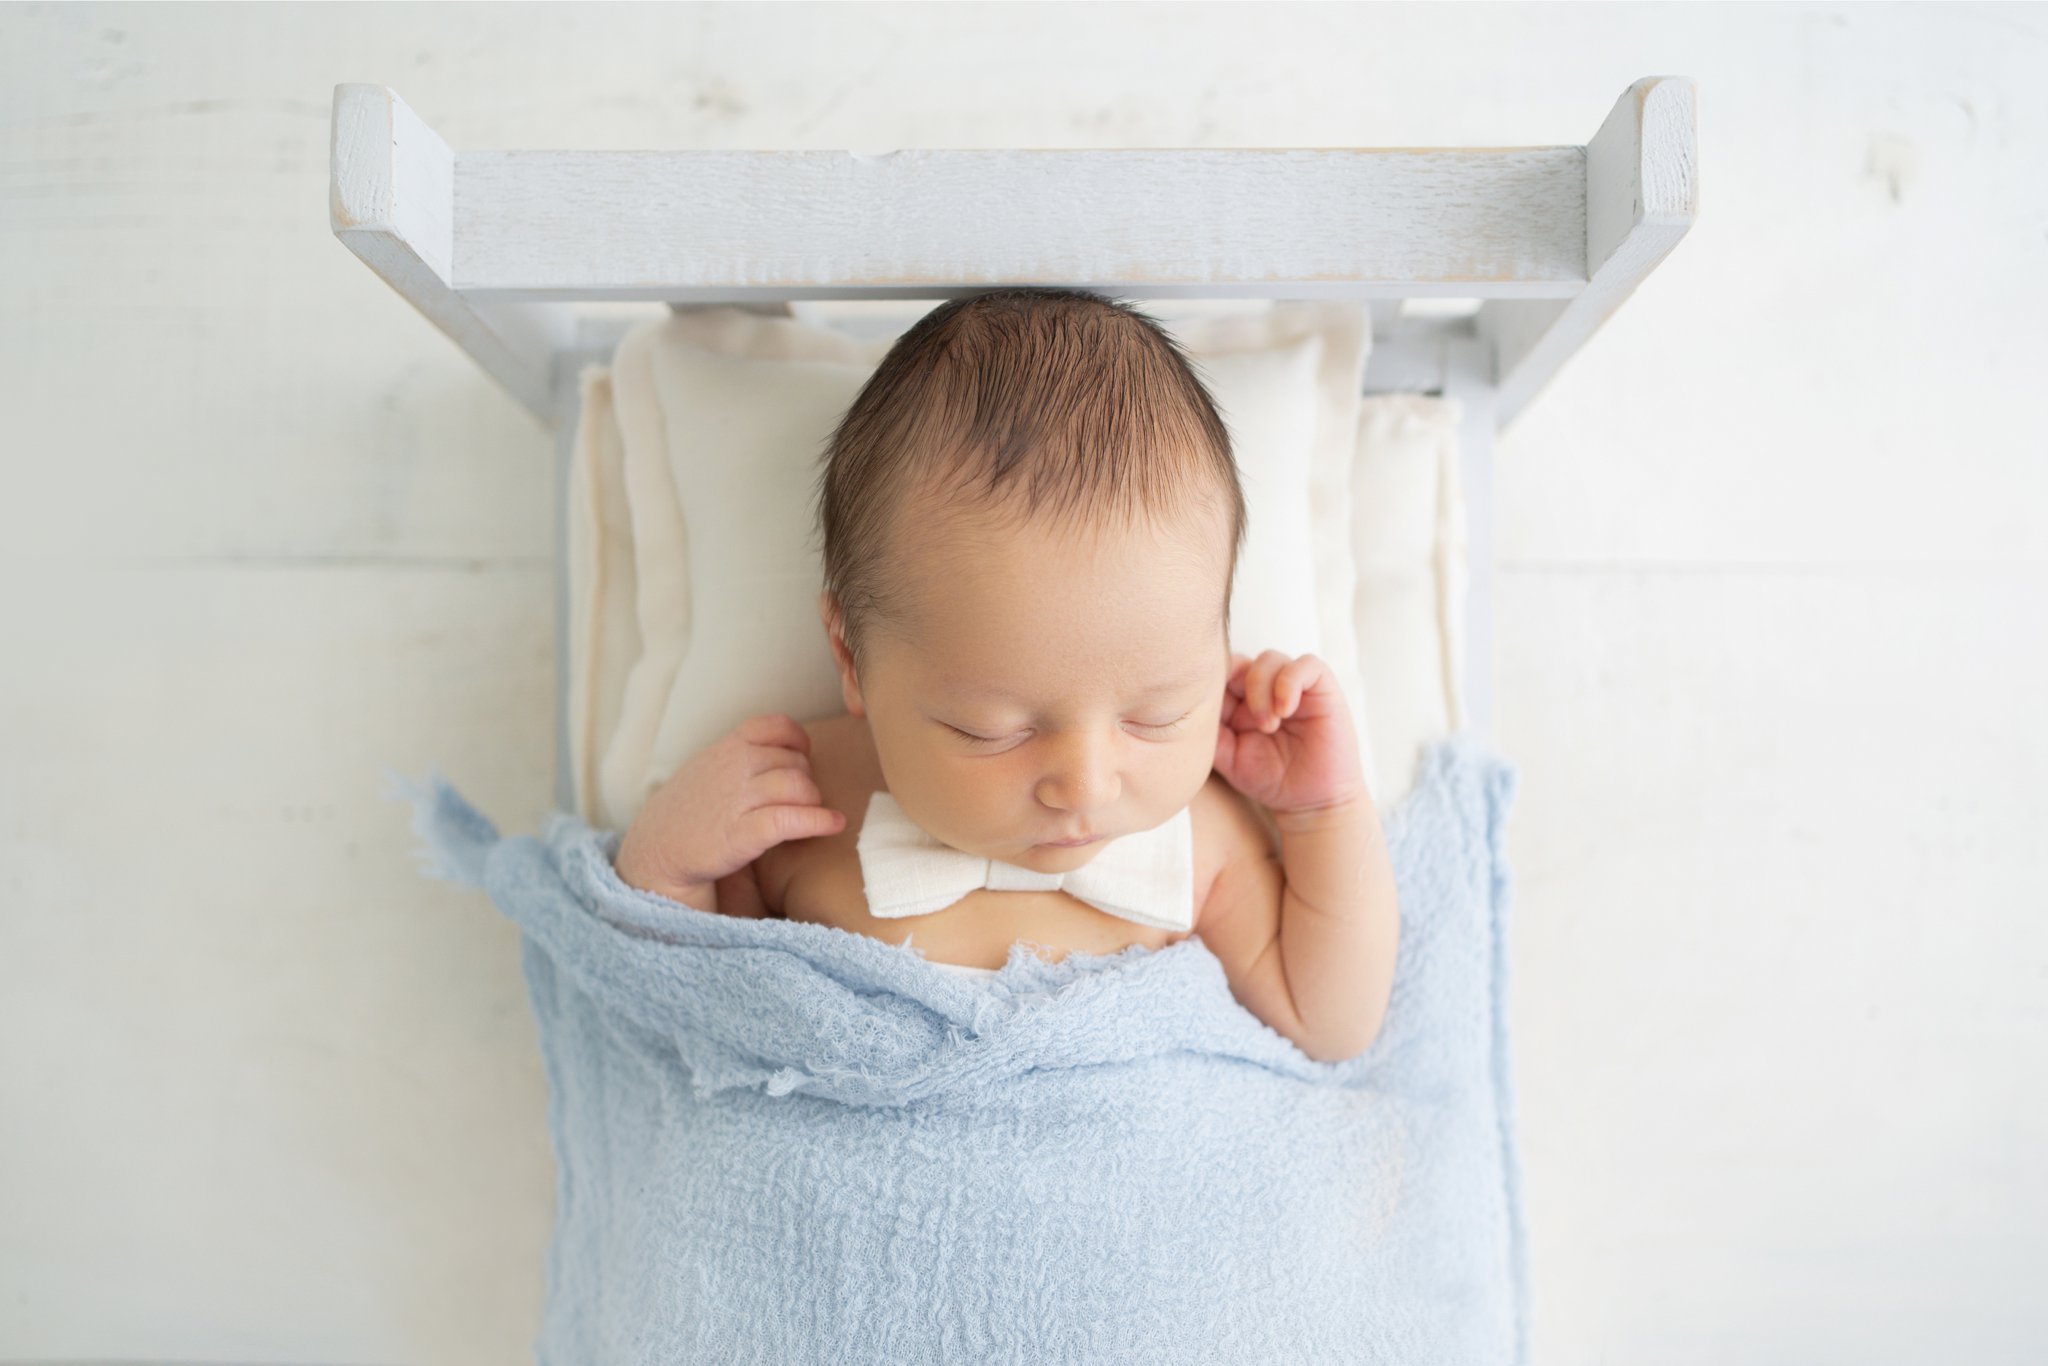 10 day old newborn baby being photographed in Jupiter Florida on a baby bed prop